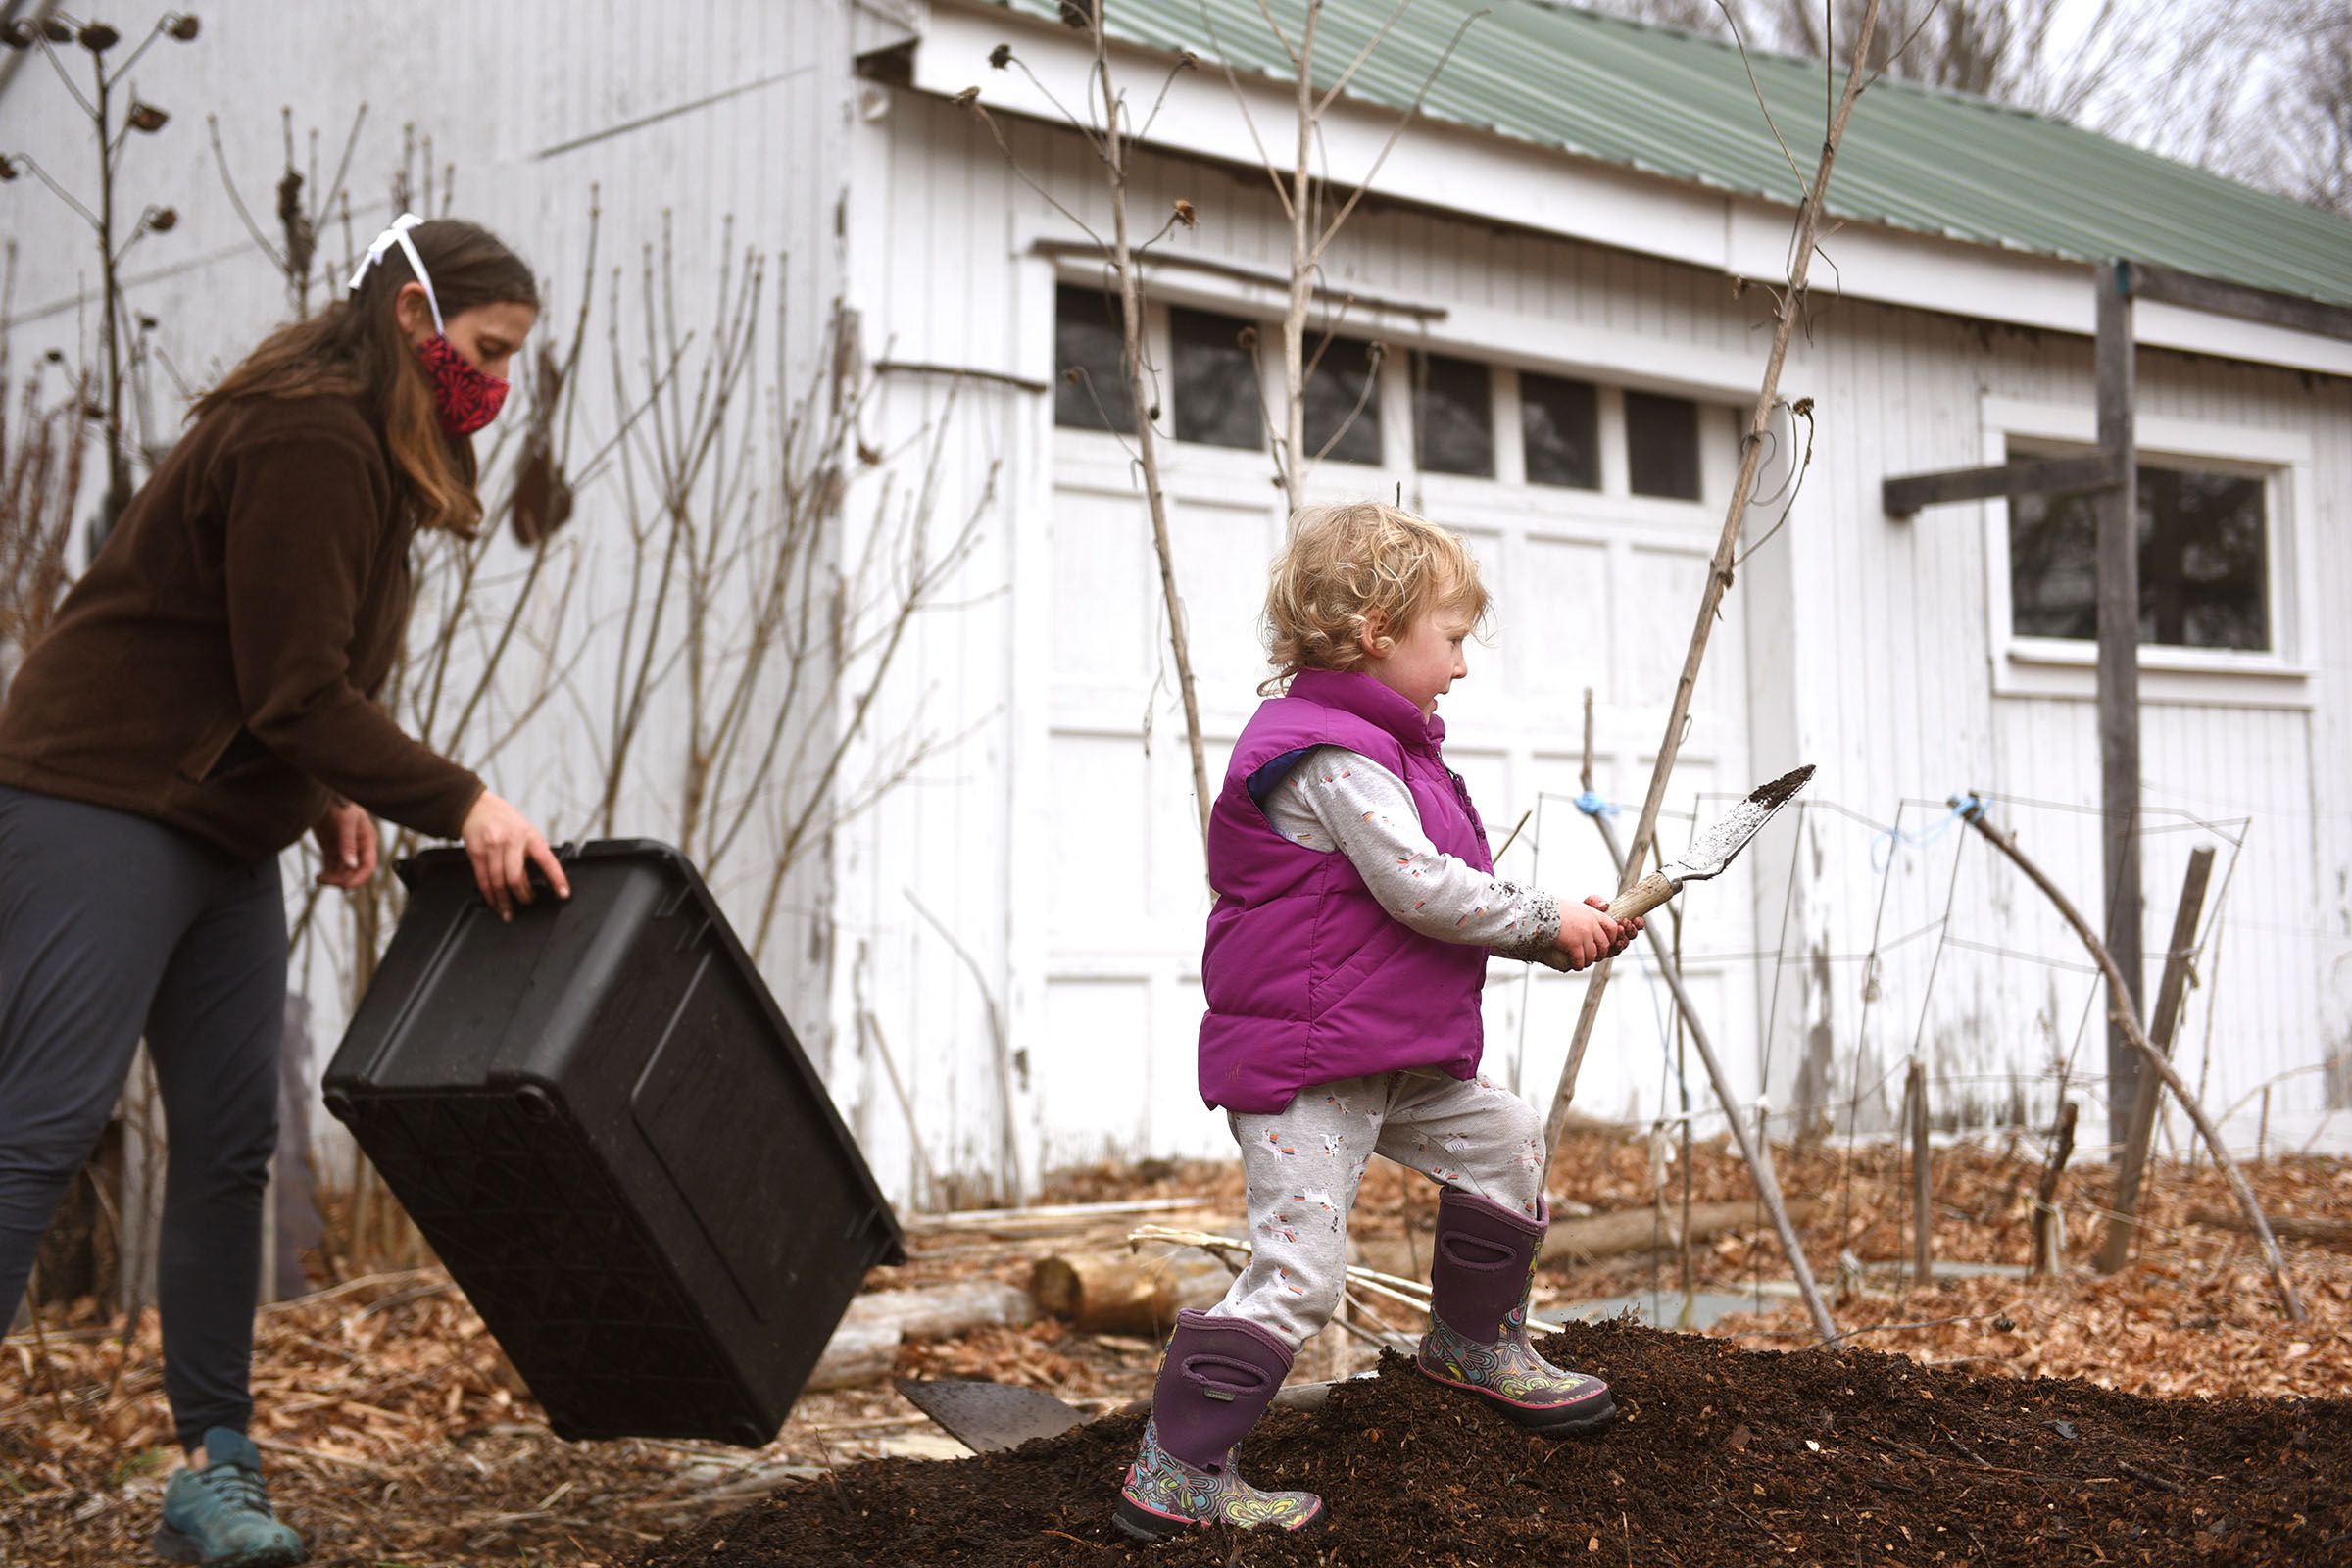 Willow Murphy helps her mother Jen Murphy shift compost at their home in Wilder, Vt., on Thursday, March, 25, 2021. The compost on the ground is about a year old after is was moved through numerous bins. (Valley News - Jennifer Hauck) Copyright Valley News. May not be reprinted or used online without permission. Send requests to permission@vnews.com.